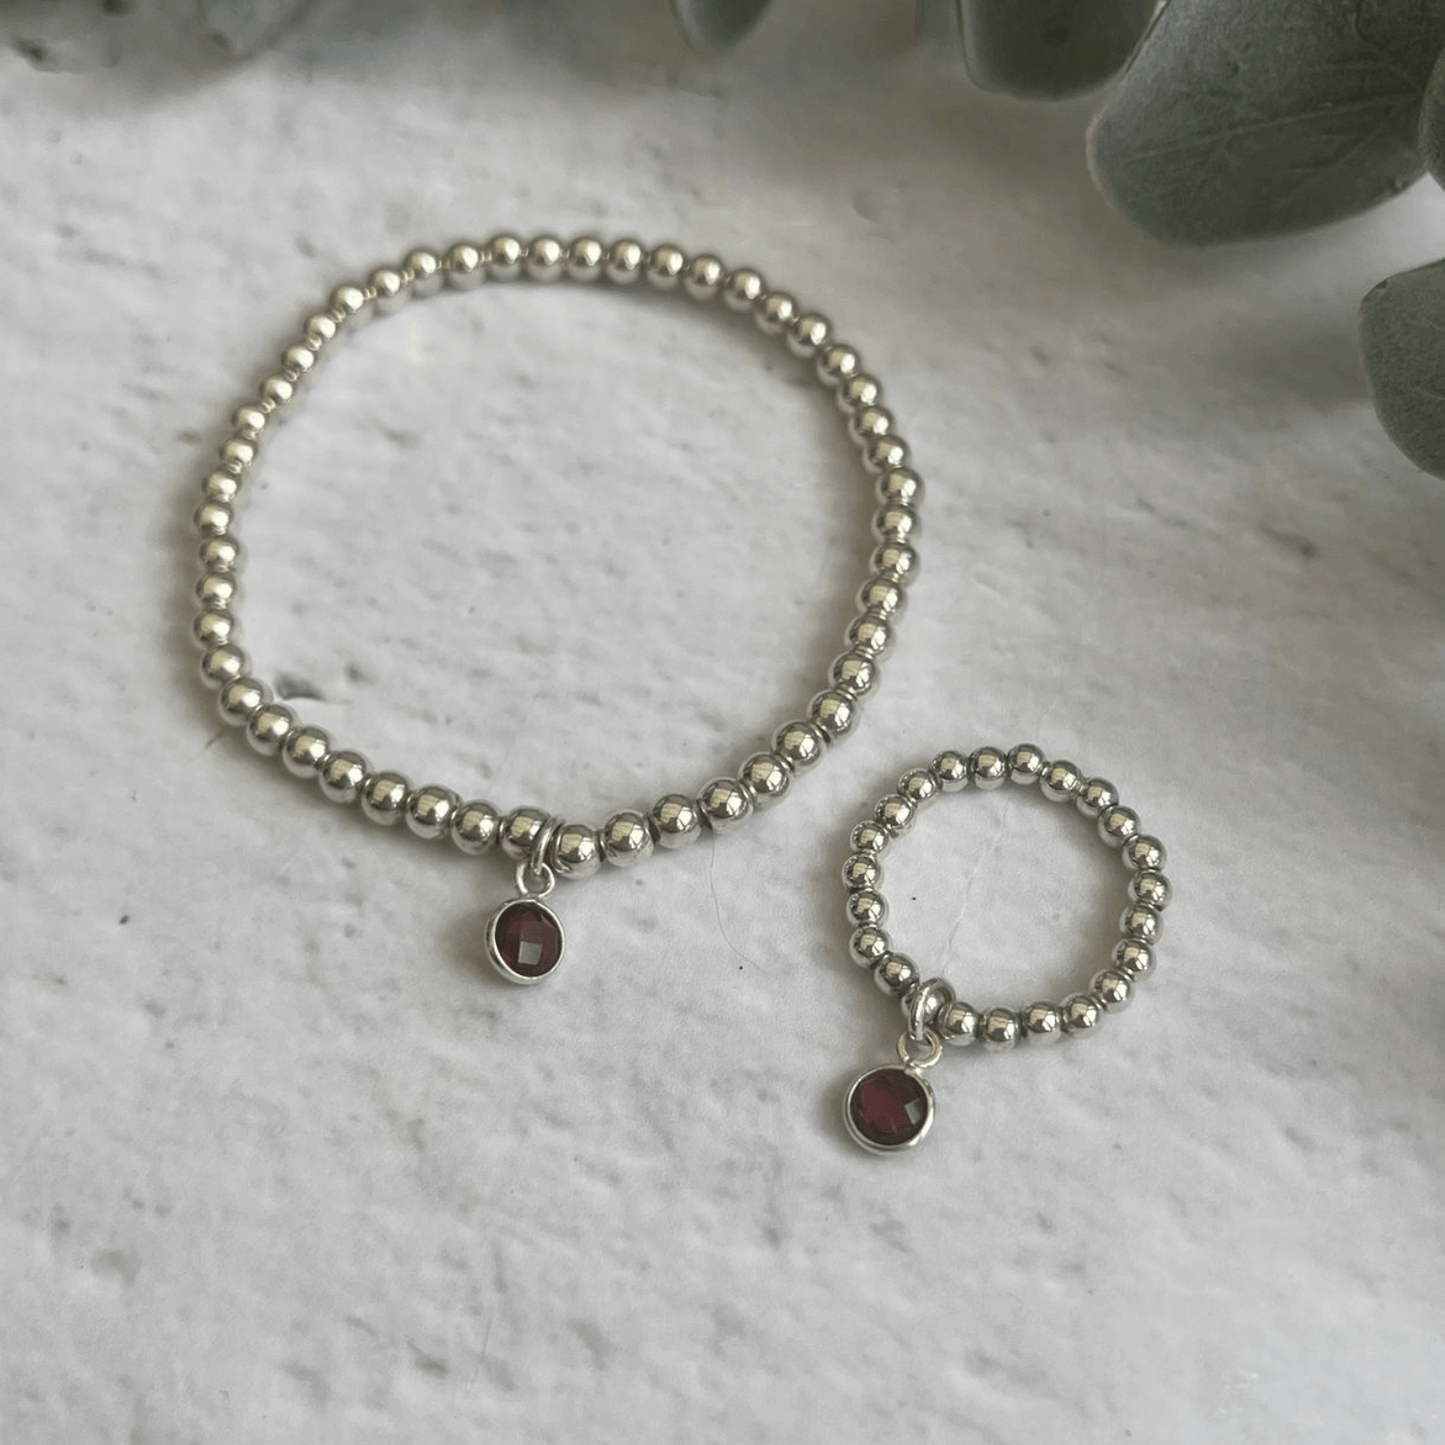 A beaded silver bracelet and ring set with small, round red gemstone charms on both pieces, displayed on a white textured surface with green leafy plants in the background. This is the Garnet Jewellery Sets by Made Here with Love.